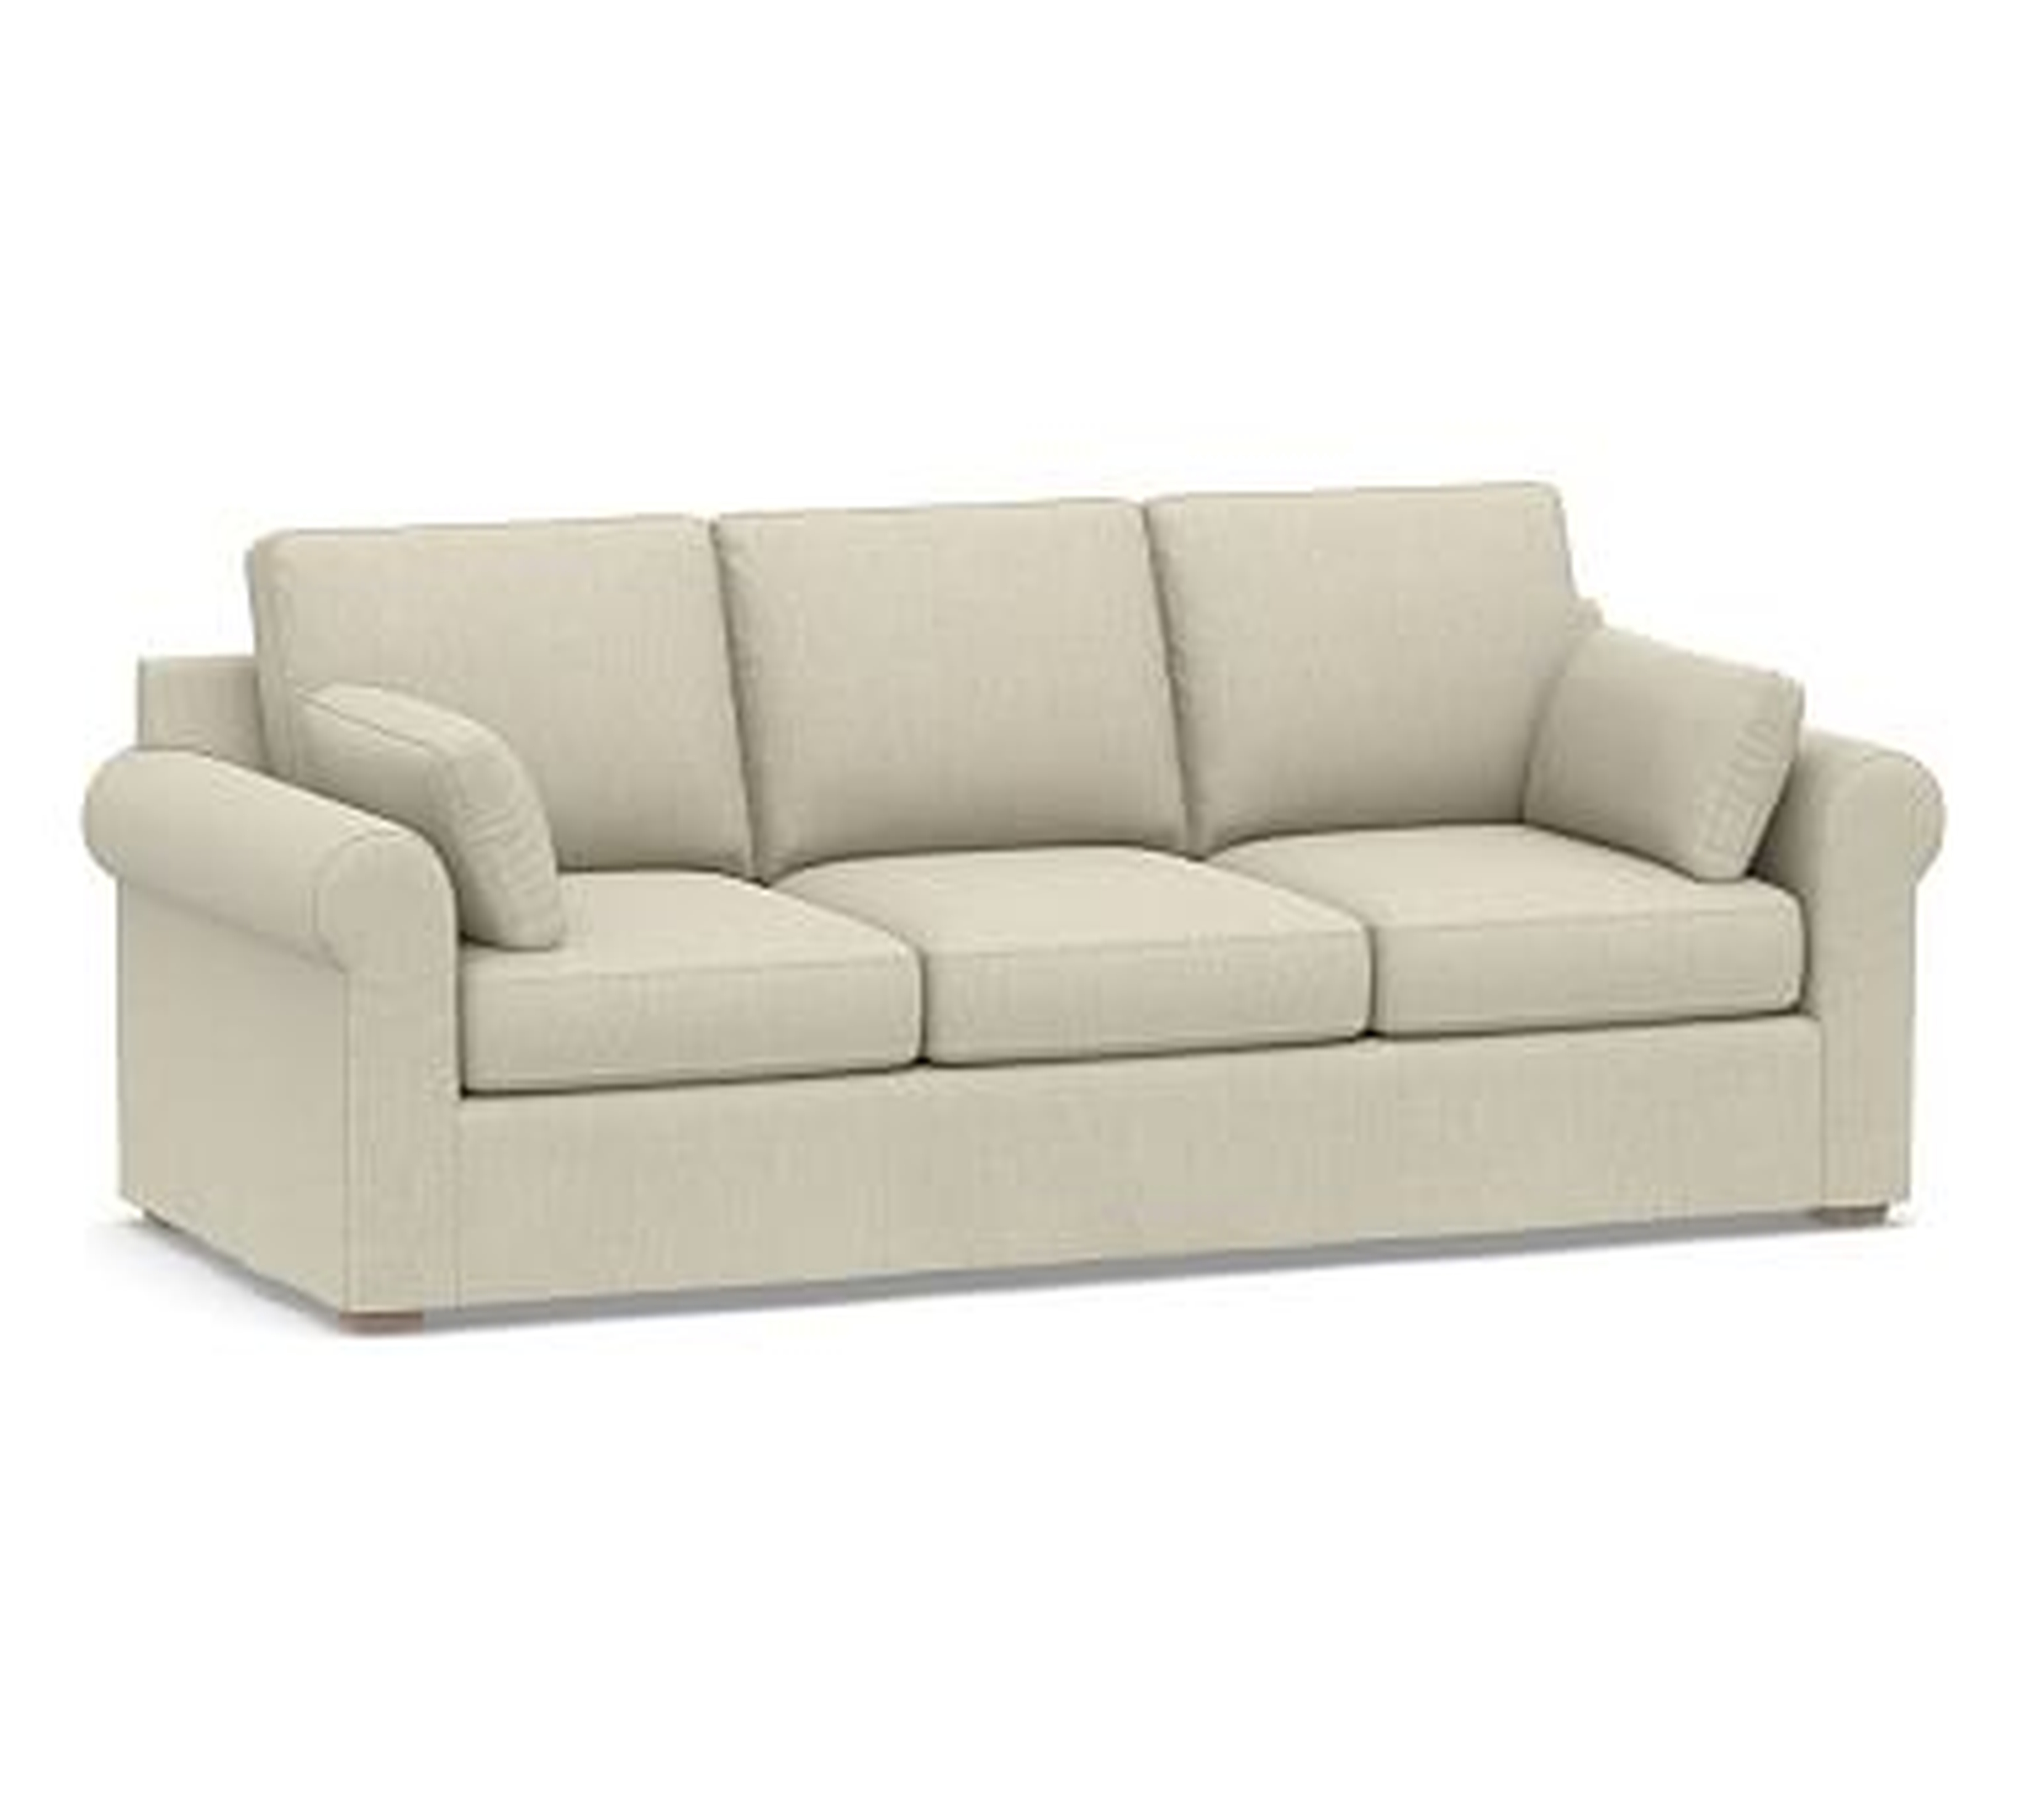 Jenner Roll Arm Slipcovered Sofa 92", Down Blend Wrapped Cushions, Chenille Basketweave Oatmeal - Pottery Barn